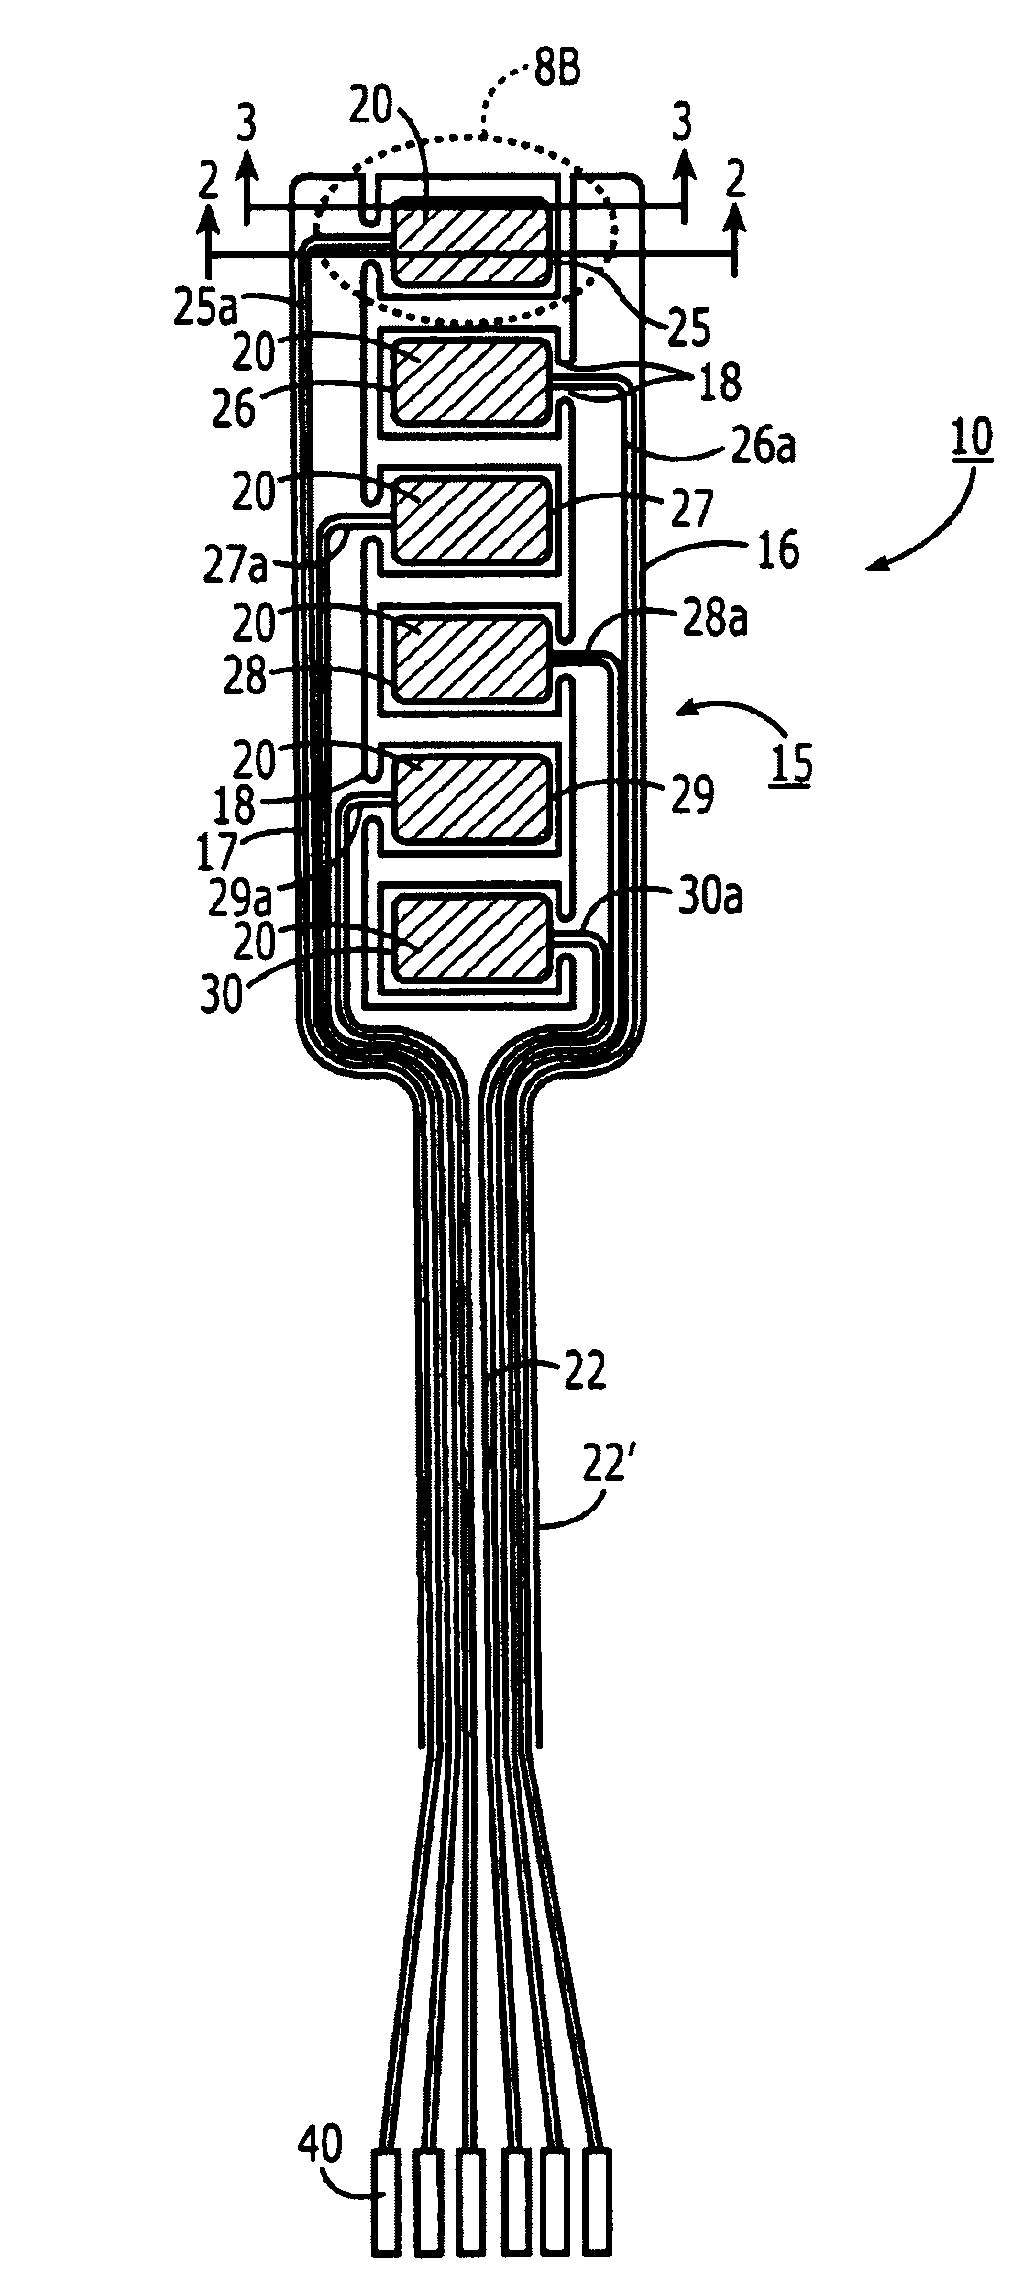 Low profile acoustic sensor arry and sensors with pleated transmission lines and related methods